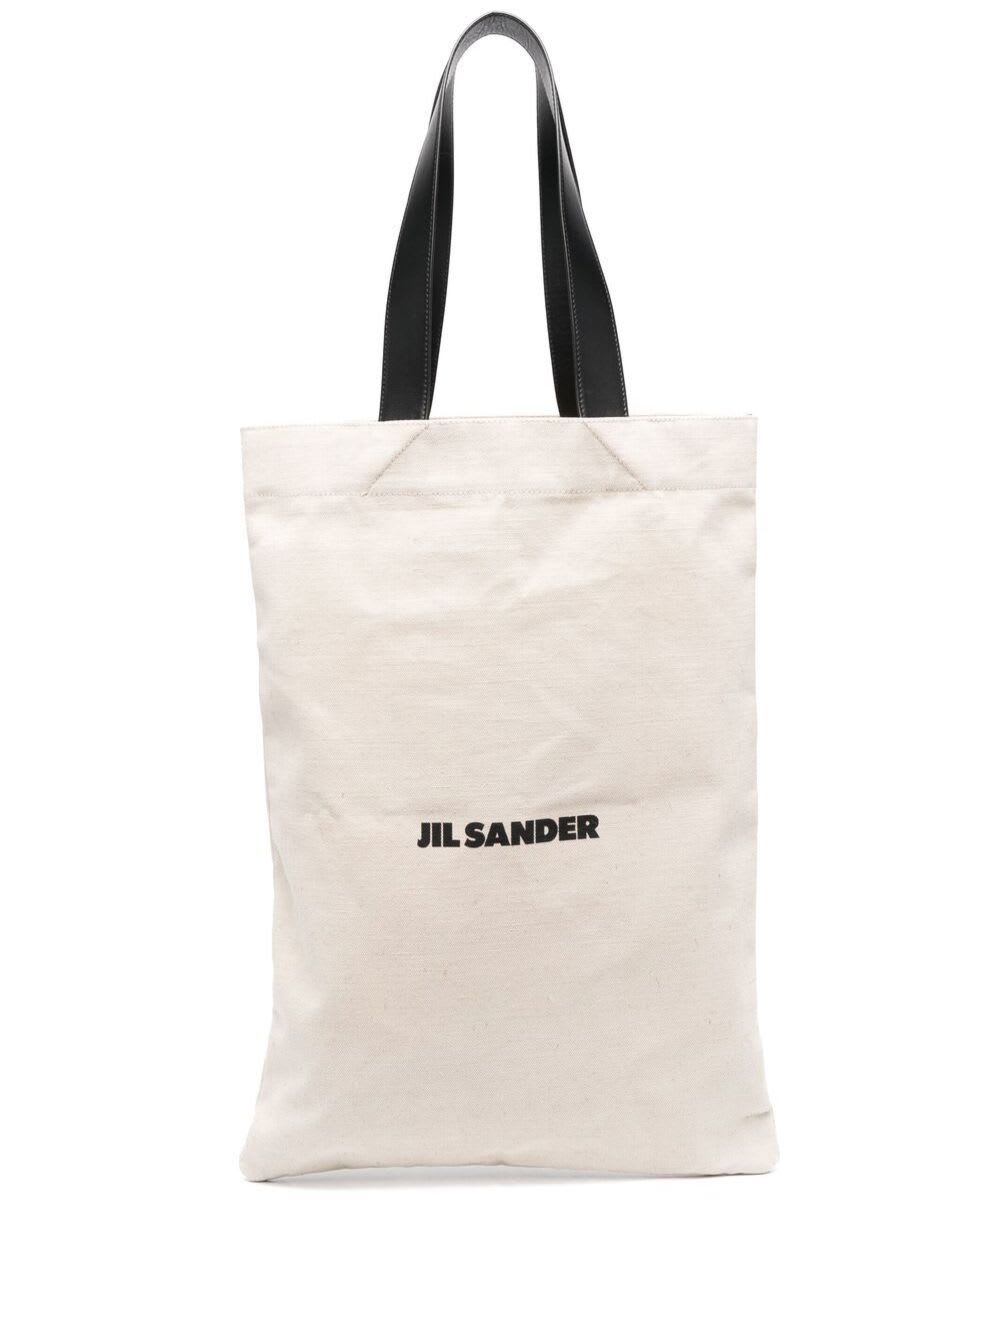 JIL SANDER WHITE TOTE BAG WITH LOGO PRINT IN CANVAS WOMAN